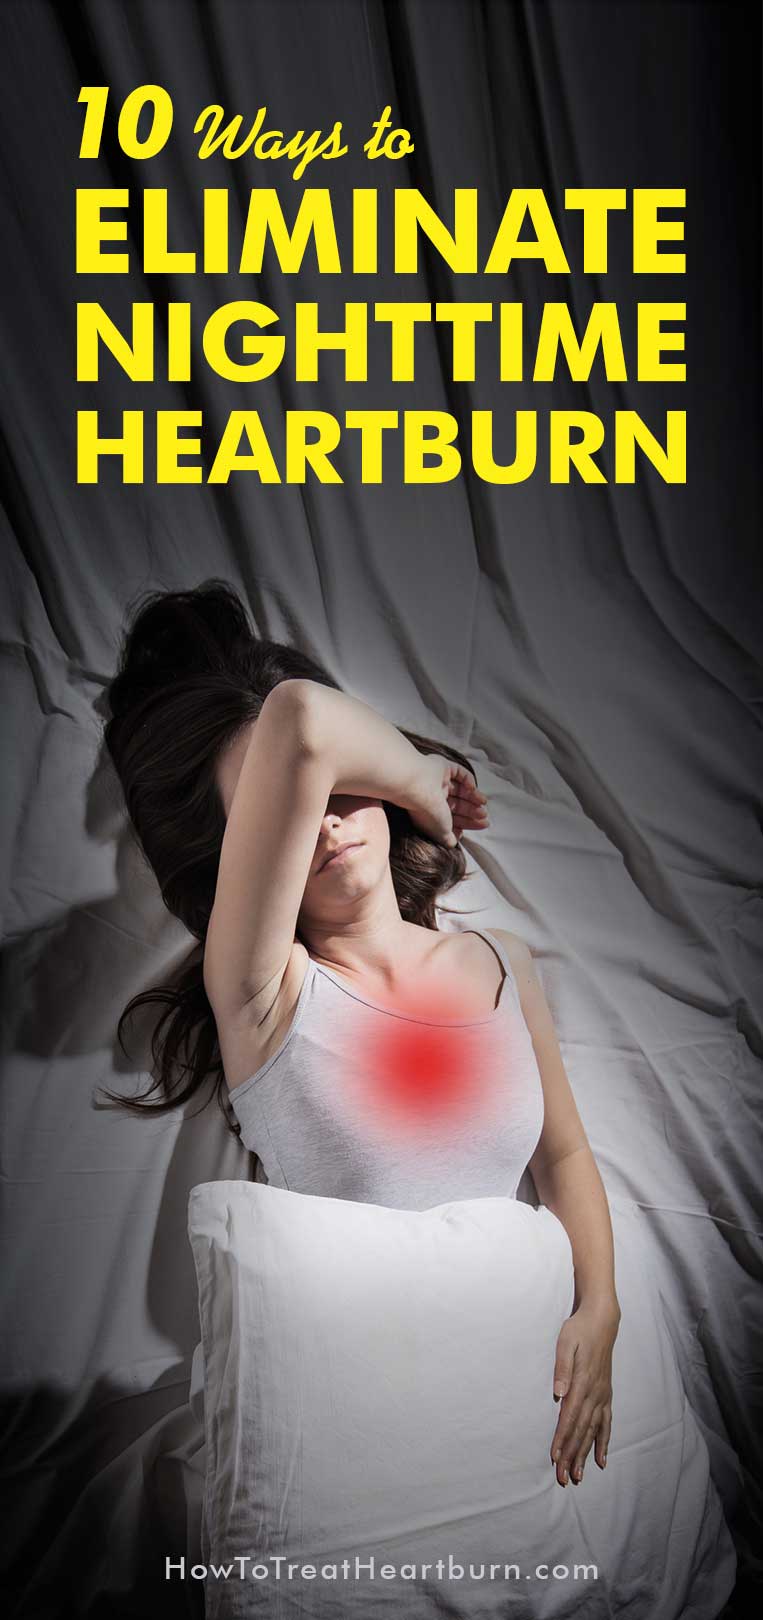 Woman laying in bed with nighttime heartburn.